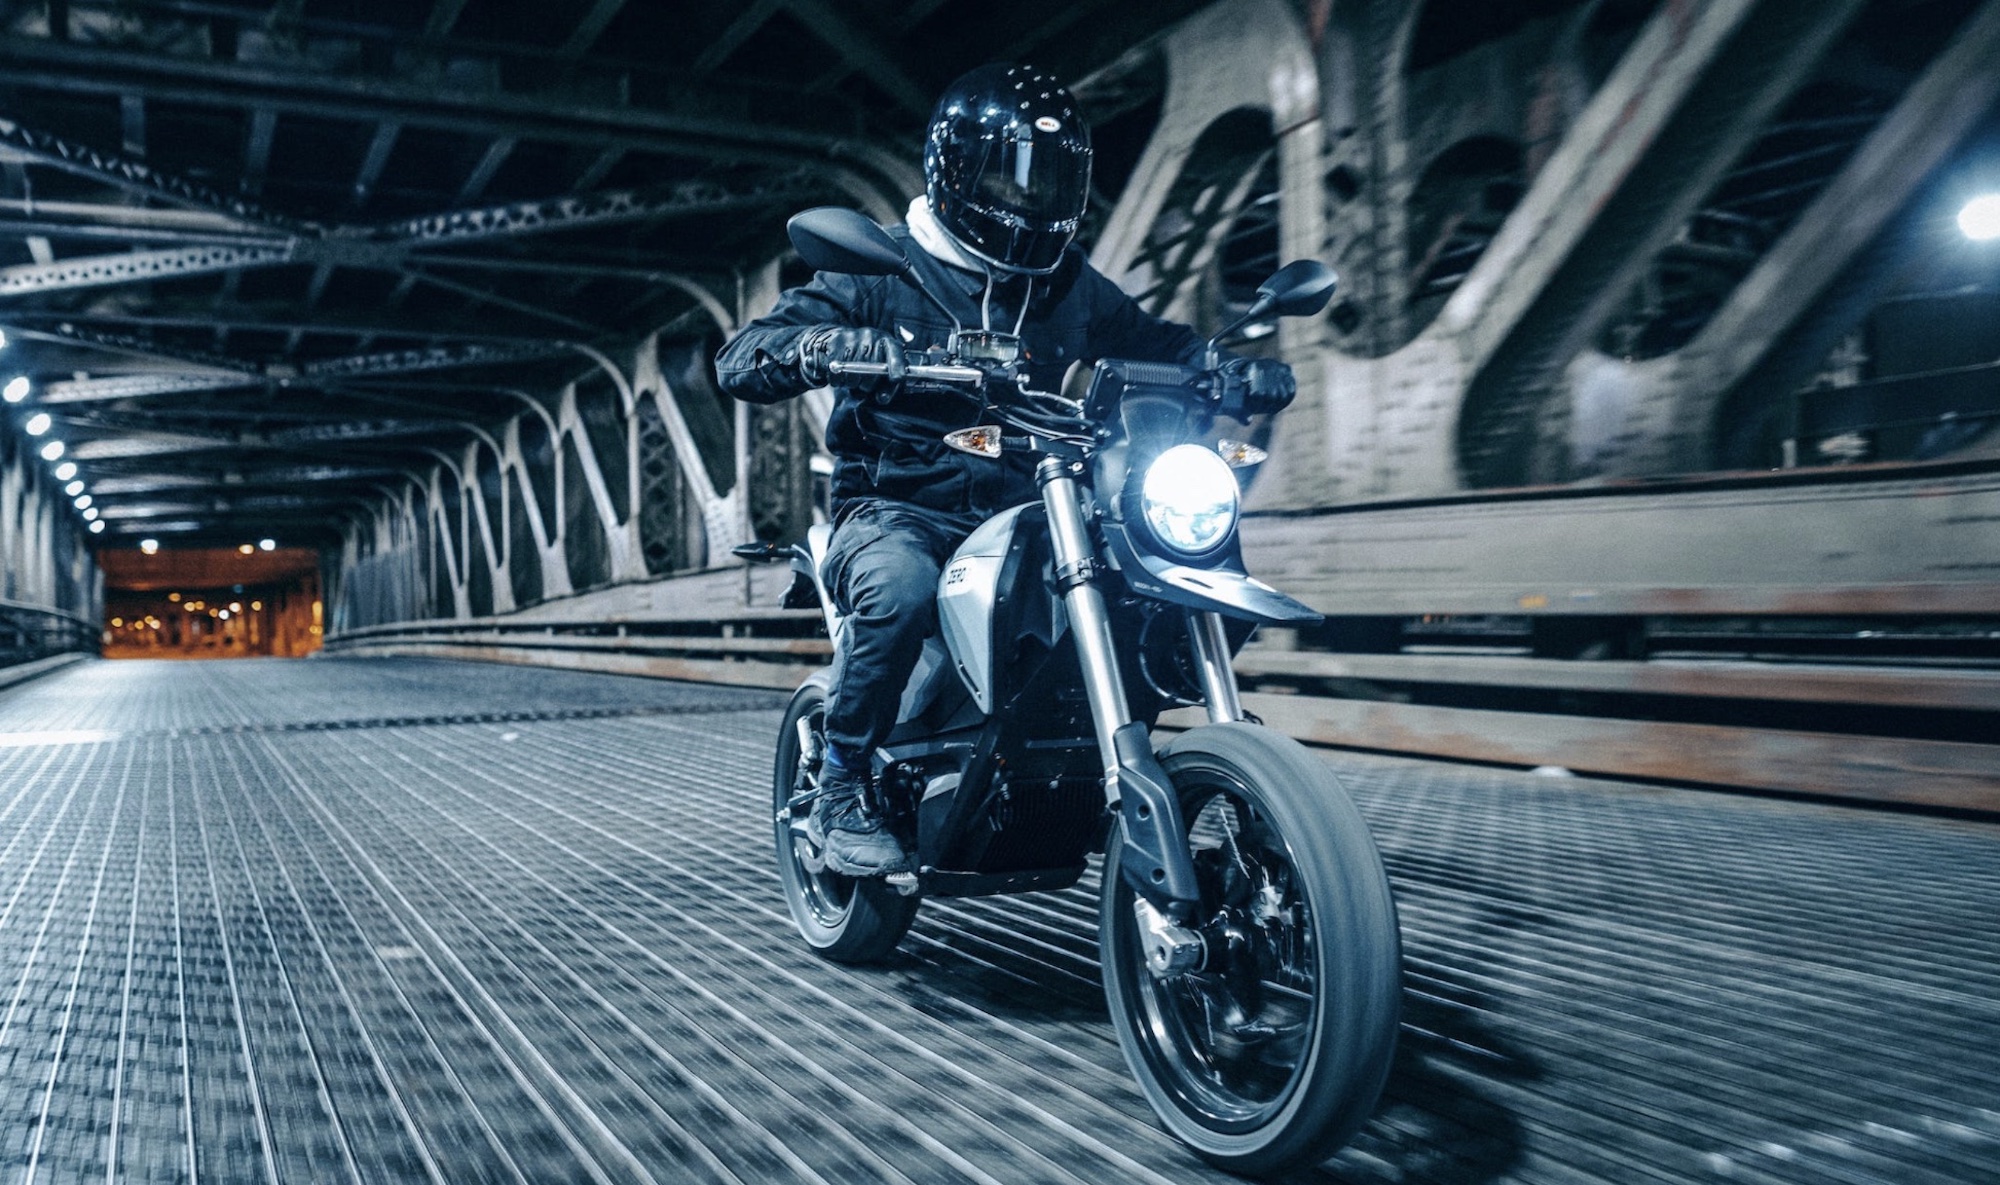 A view of Zero Motorcycles' crowd fave, the SR/F. Media sourced from Zero Motorcycles.